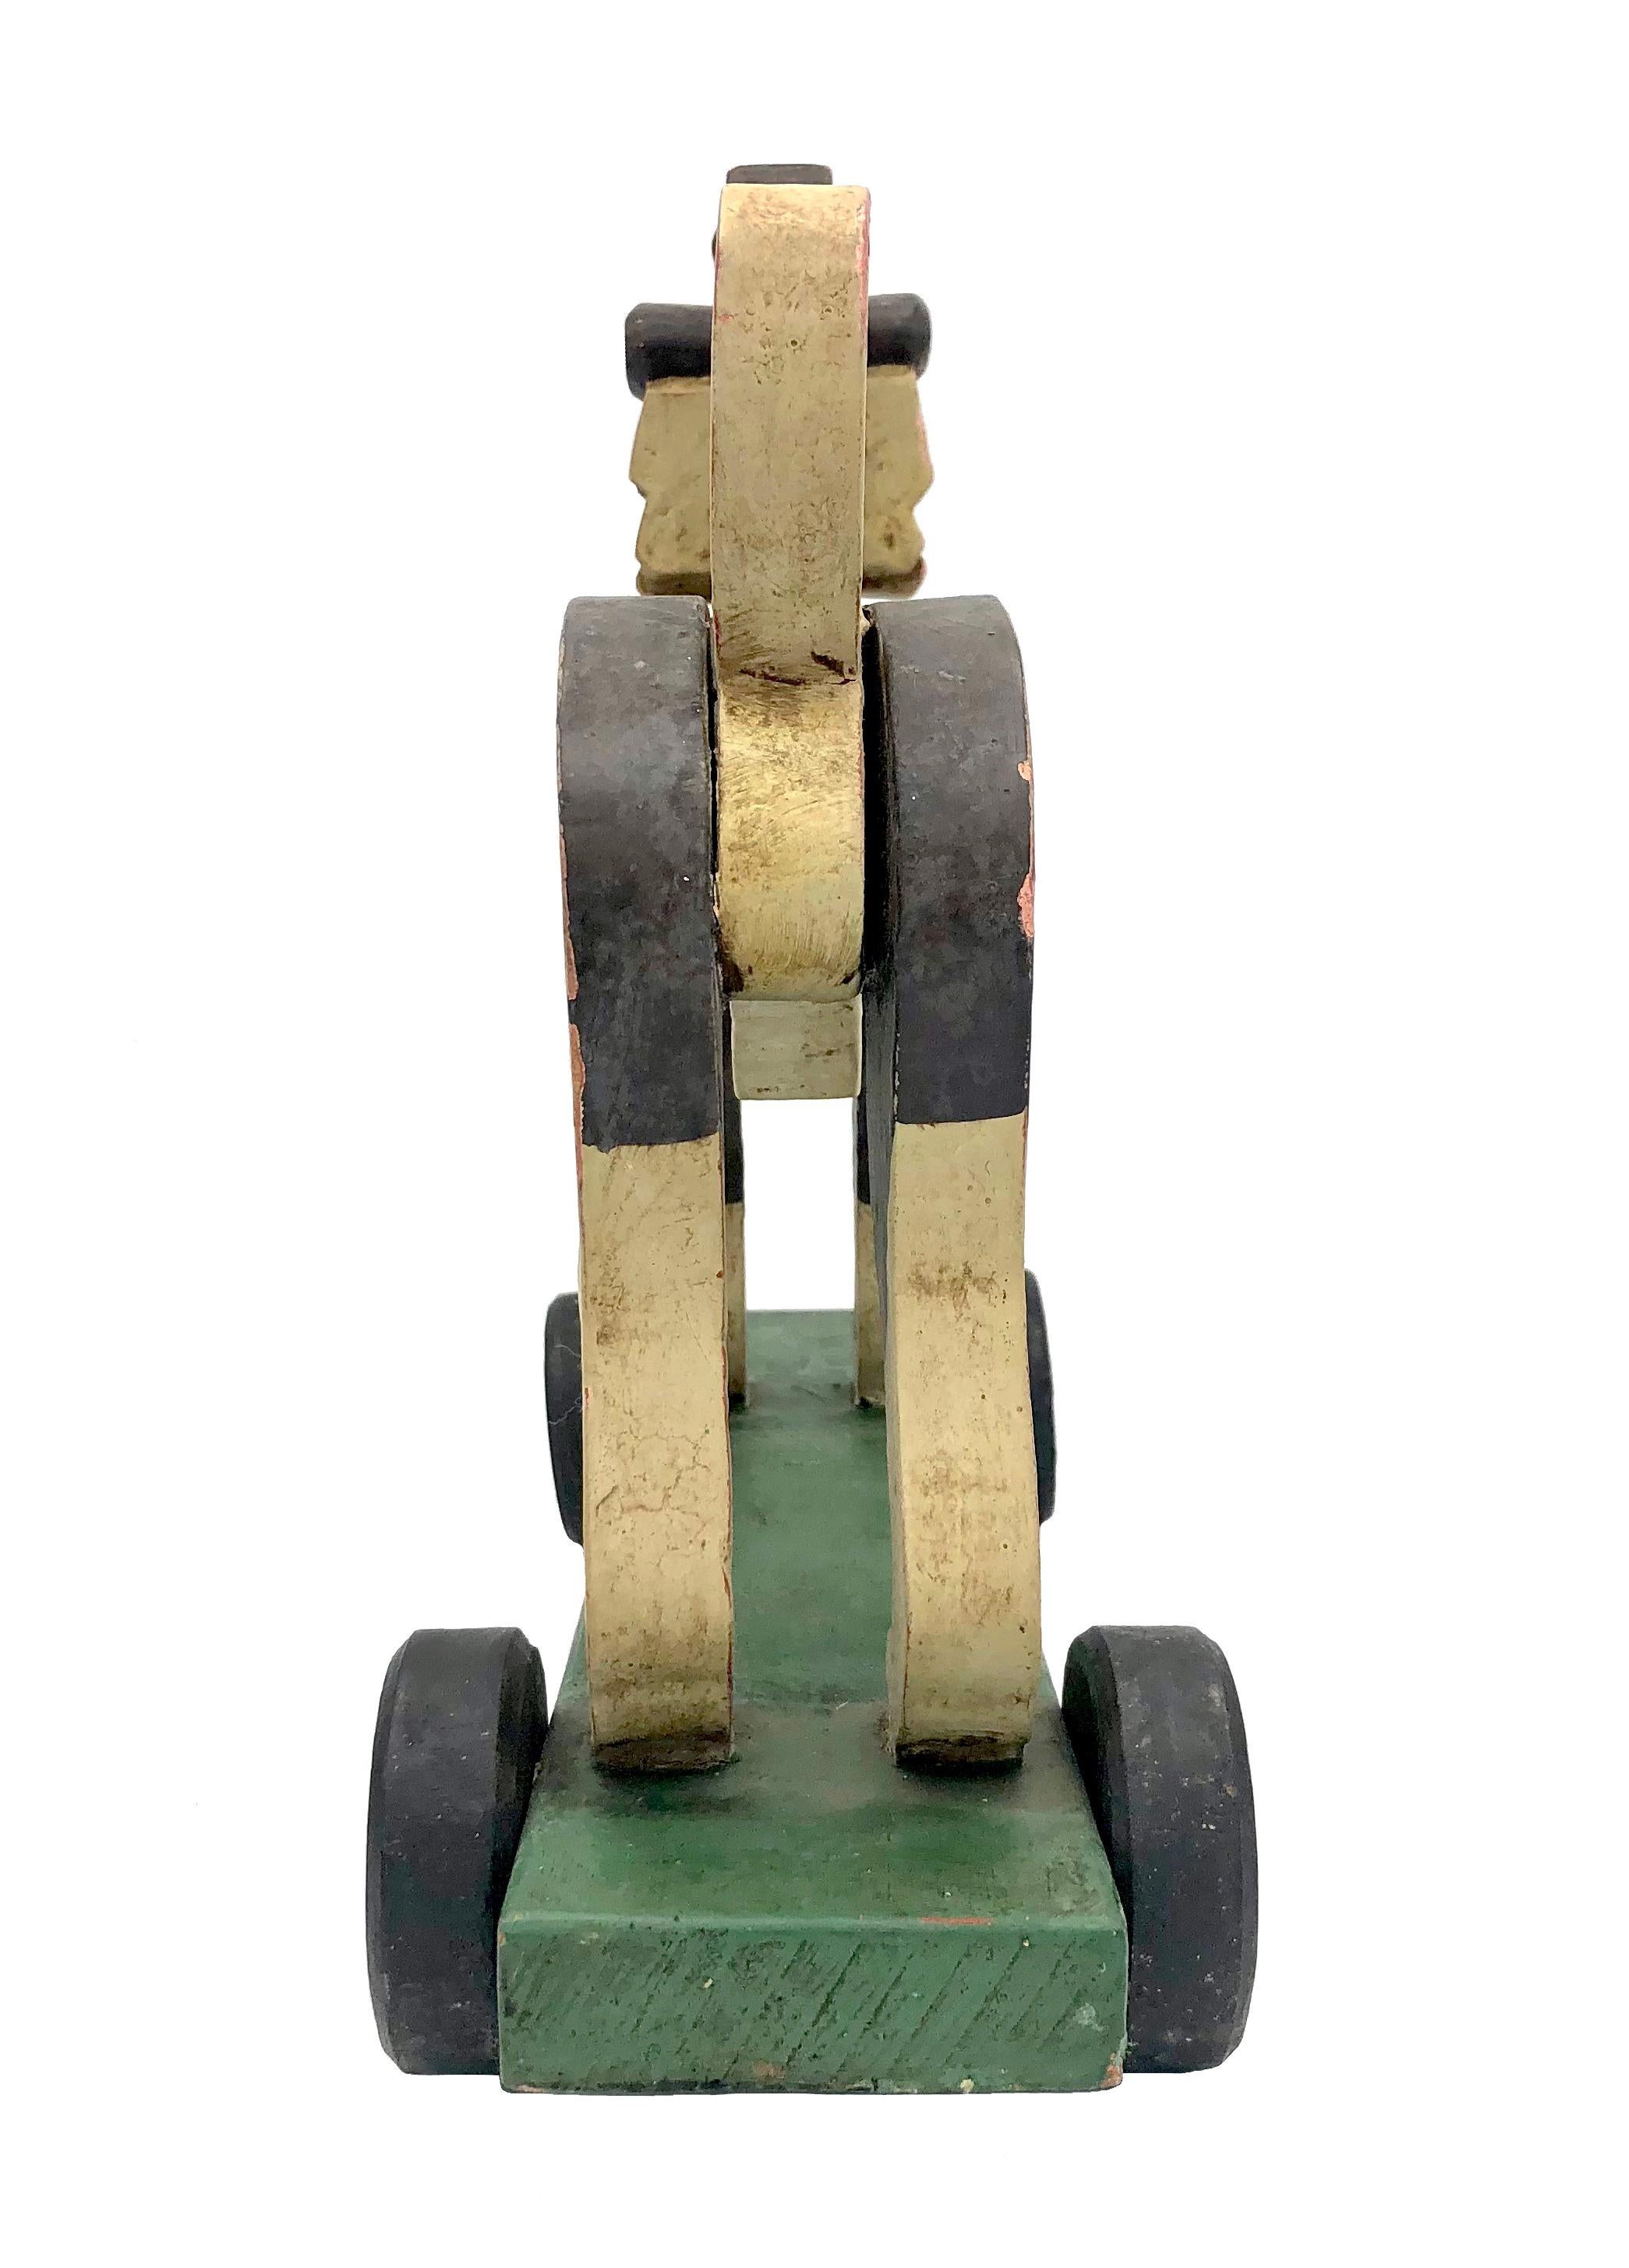 This beautiful double sided beagle is made out of carved wood and has been hand painted. It is fixed onto a green wooden base with four wheels.
The paint has worn off on some of the edges but the dog remains in remarkable fresh condition for it's